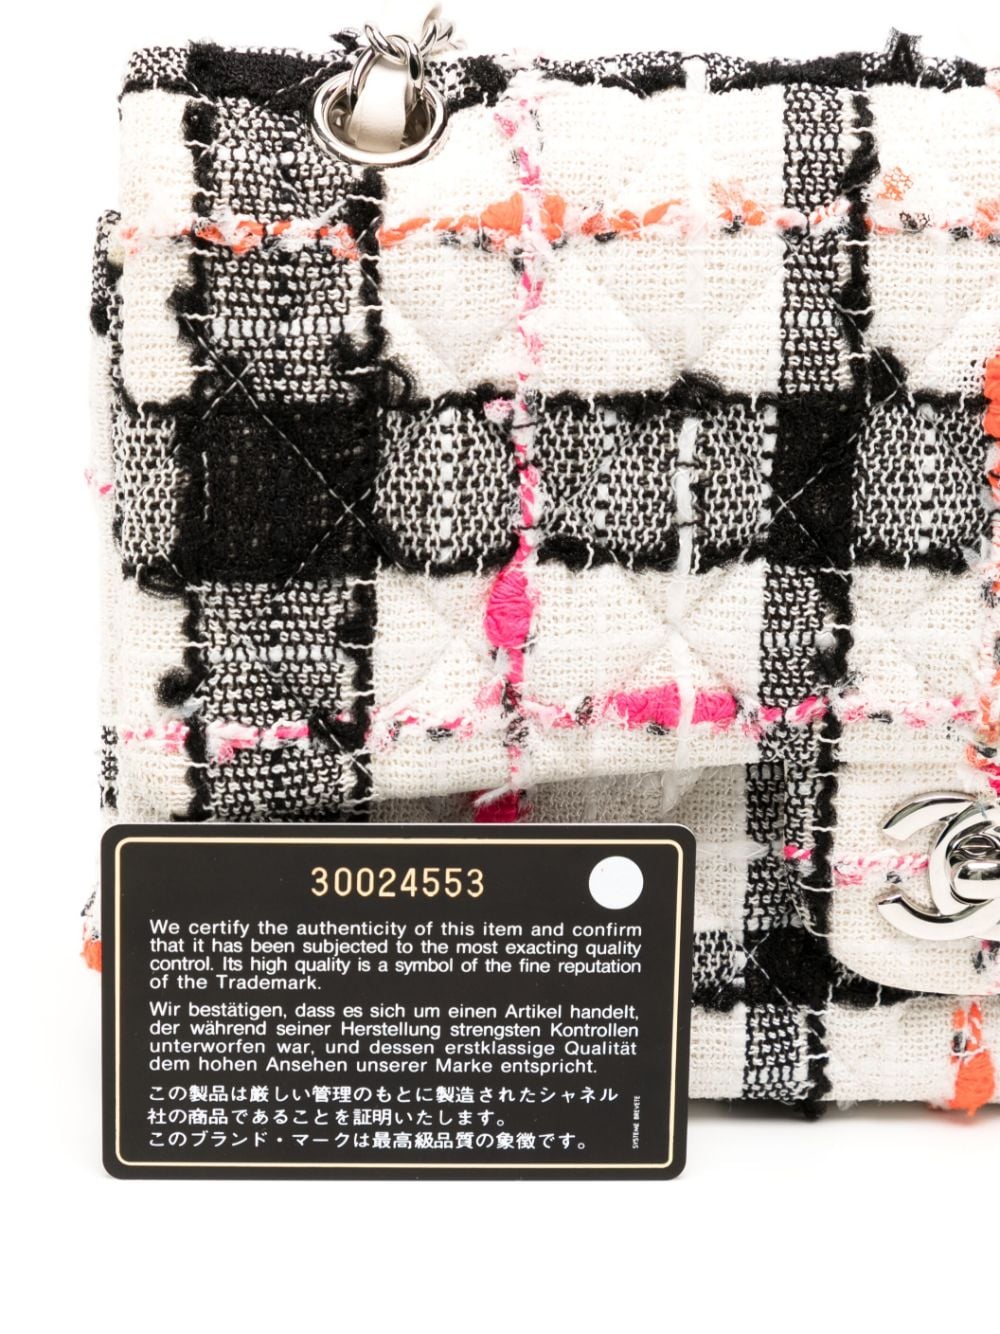 Chanel Limited Edition Ginza Double Flap in Tweed